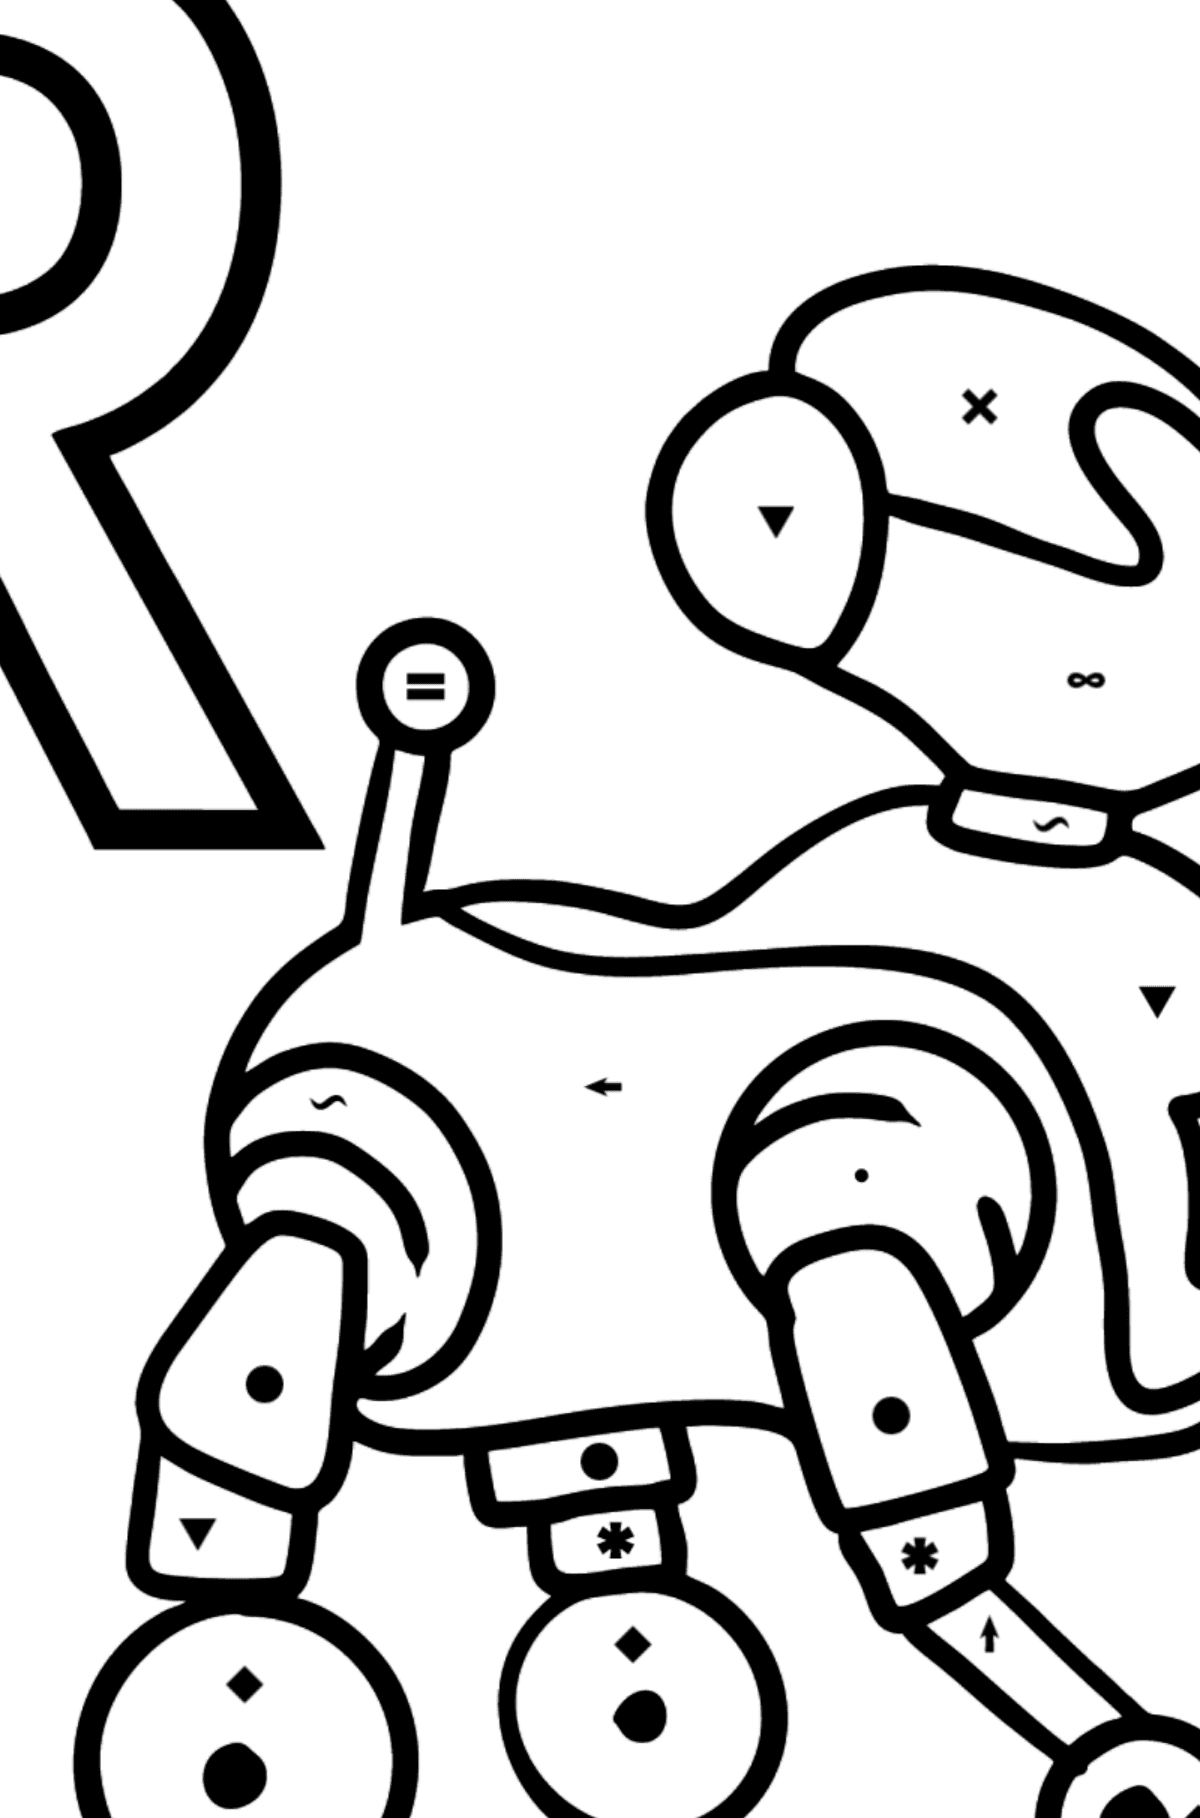 Spanish Letter R coloring pages - ROBOT - Coloring by Symbols for Kids